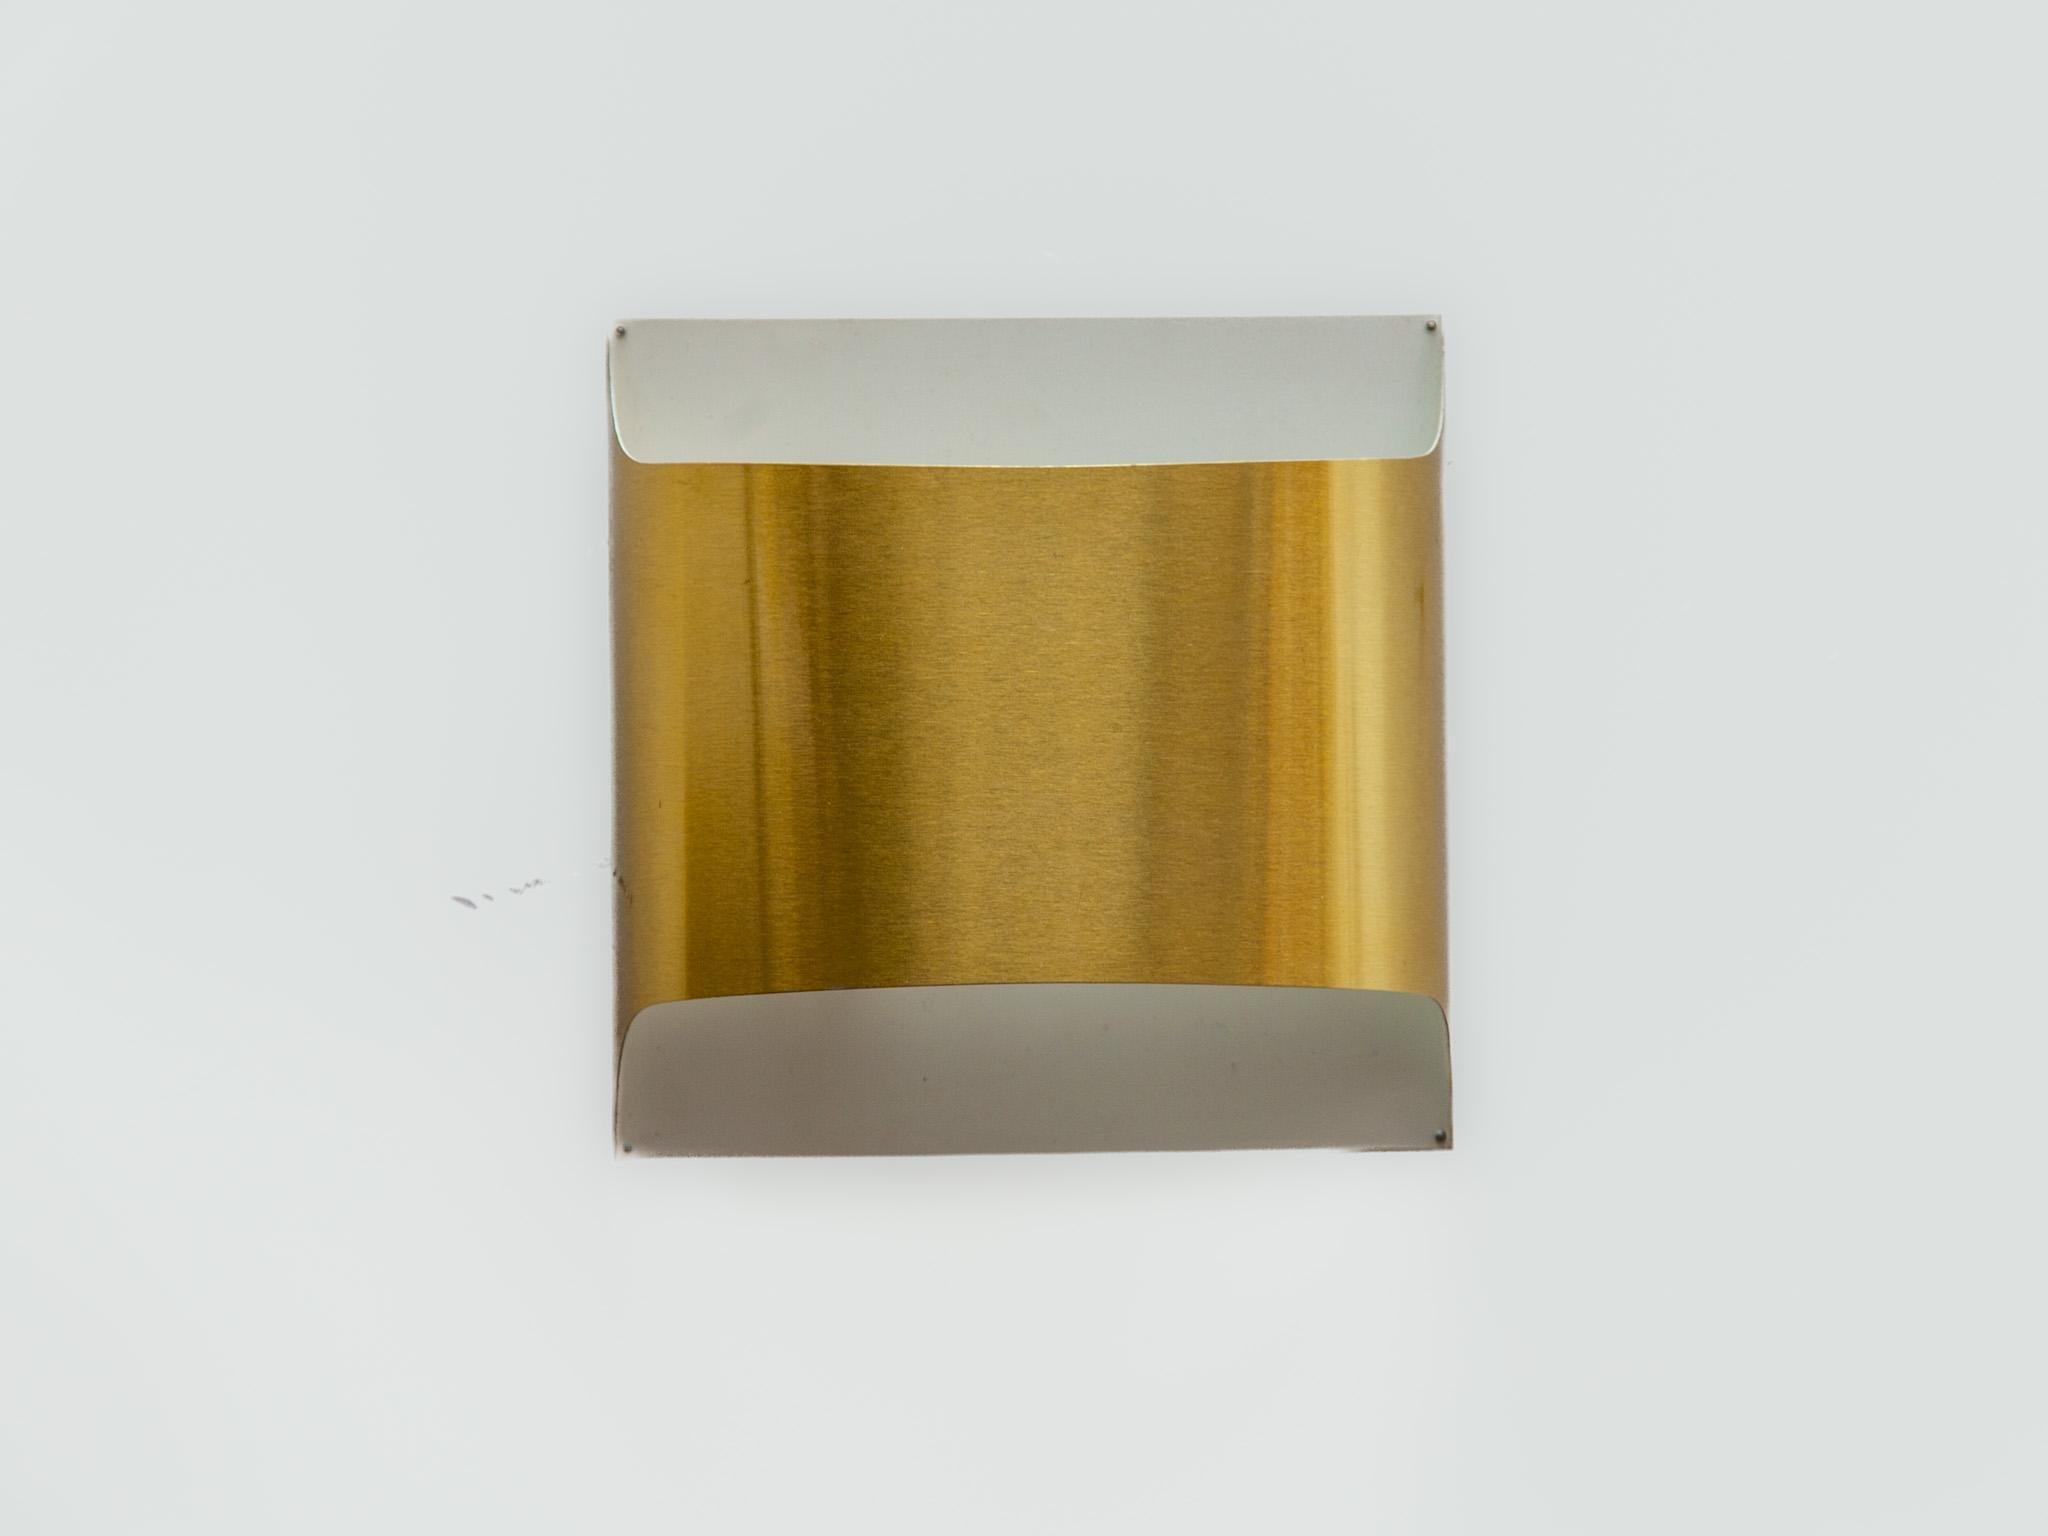 Architectural set of two 1970s minimalist modern design, metal gold wall lamps designed by Rolf Krüger and Dieter Witte for manufacture STAFF Leuchten, Germany.
The wall lights designed to direct an equal amount of light up and down, will help to